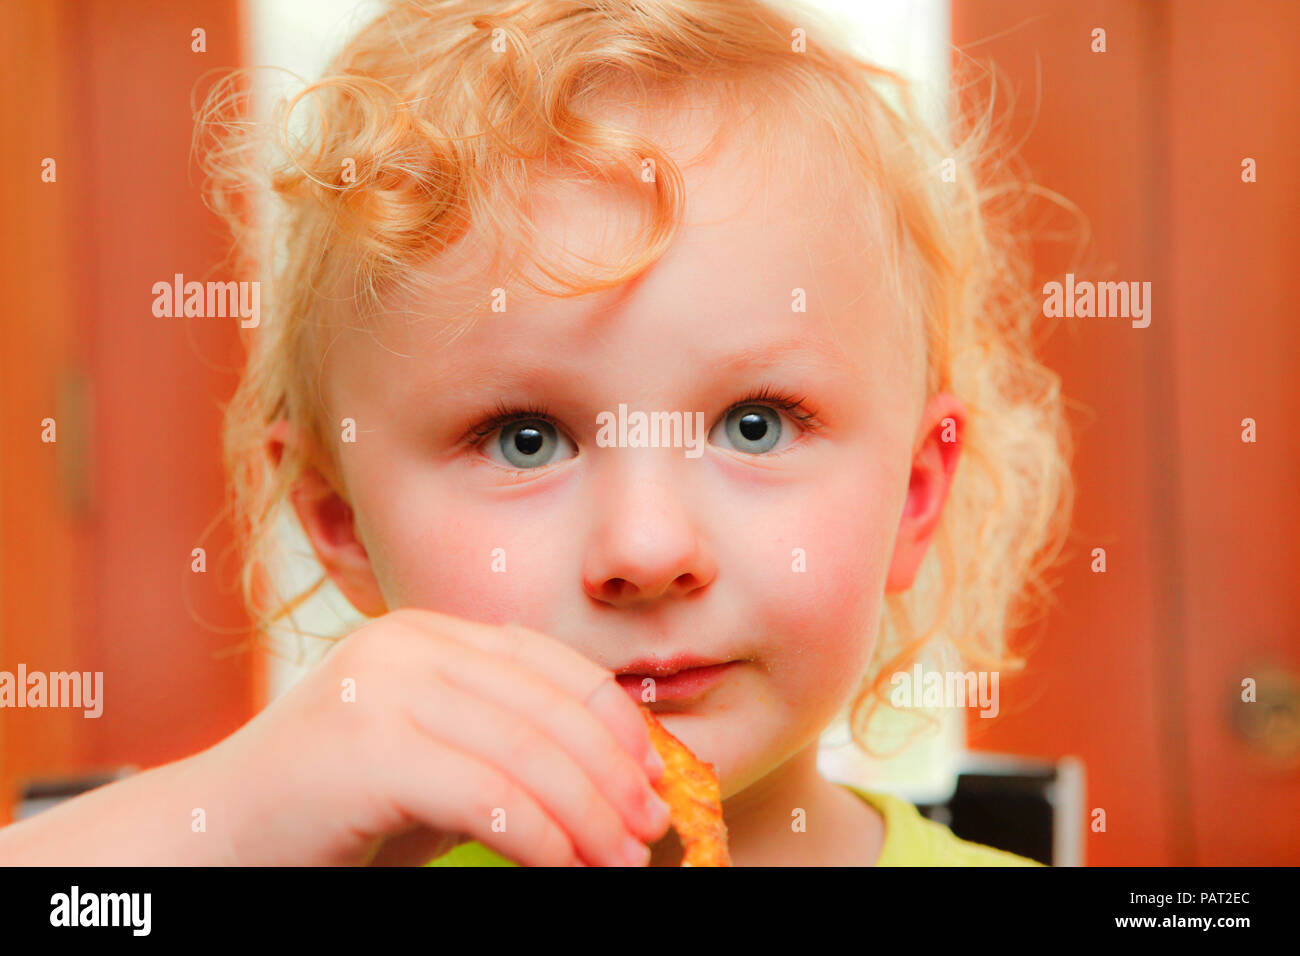 Adorable child eating a snack Stock Photo